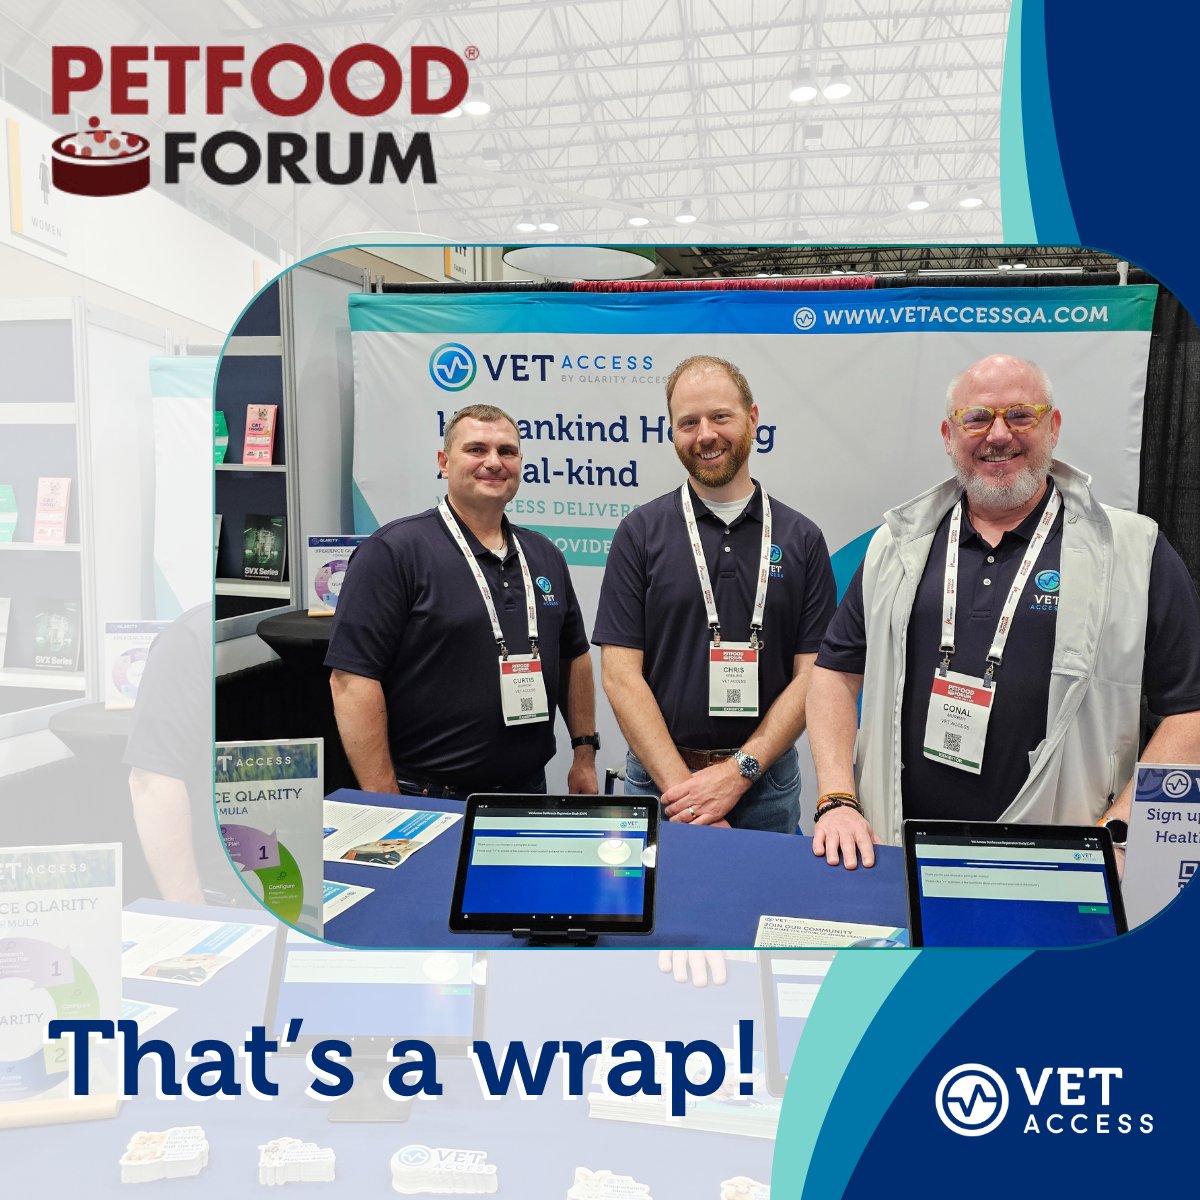 A week has flown by since the Petfood Forum, and we're still inspired by all the amazing animal health professionals we met! Your passion fuels our commitment to excellence in pet nutrition. Thank you for the memorable discussions!

#vetaccess #petfoodforum2024 #animalhealth #mrx